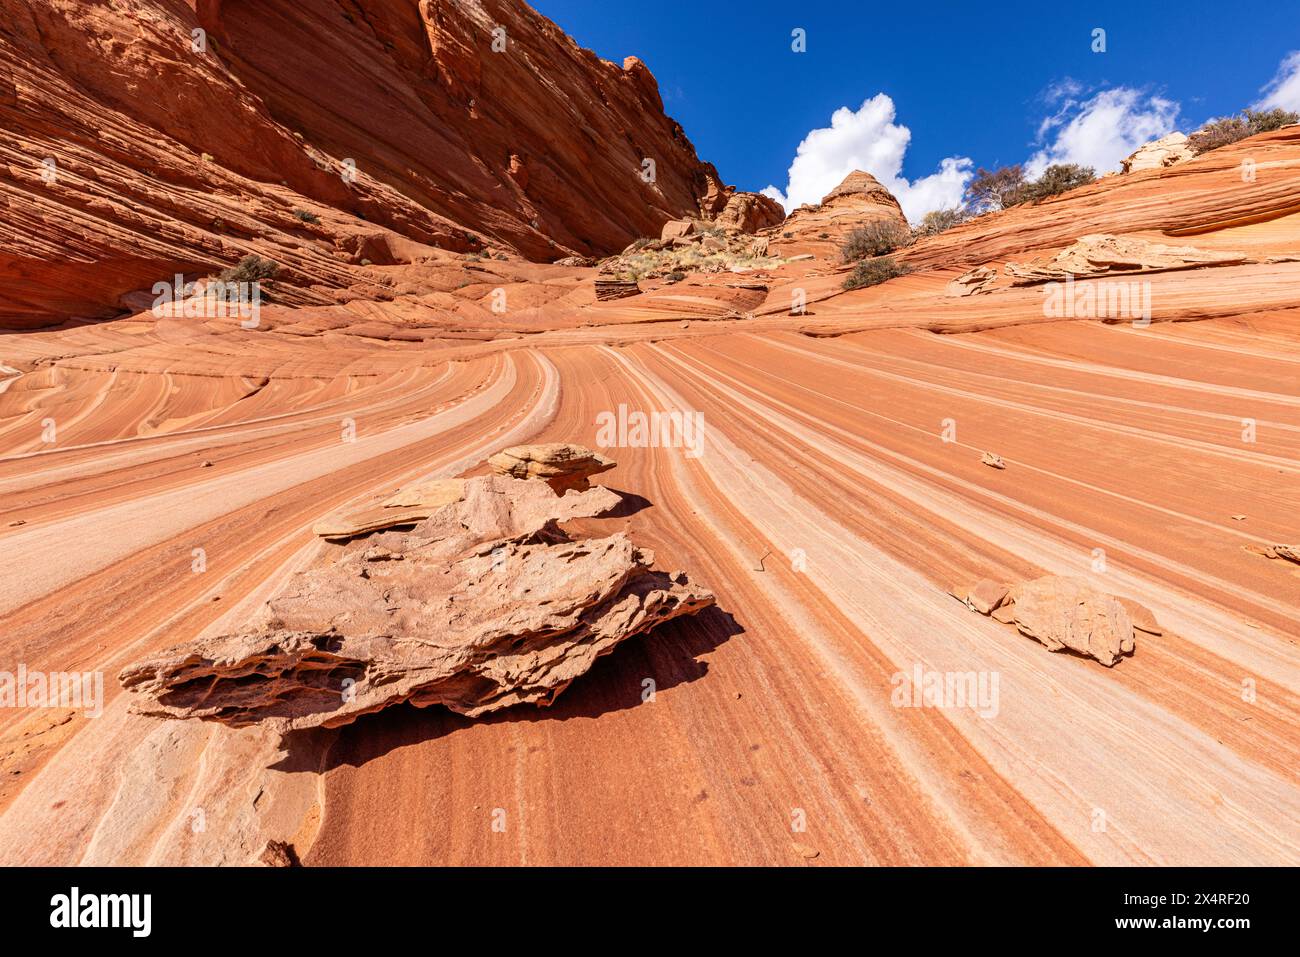 Fatali's Boneyard fossils near the Wave, Coyote Buttes North at Paria Canyon, Vermilion Cliffs National Monument, Arizona, USA Stock Photo